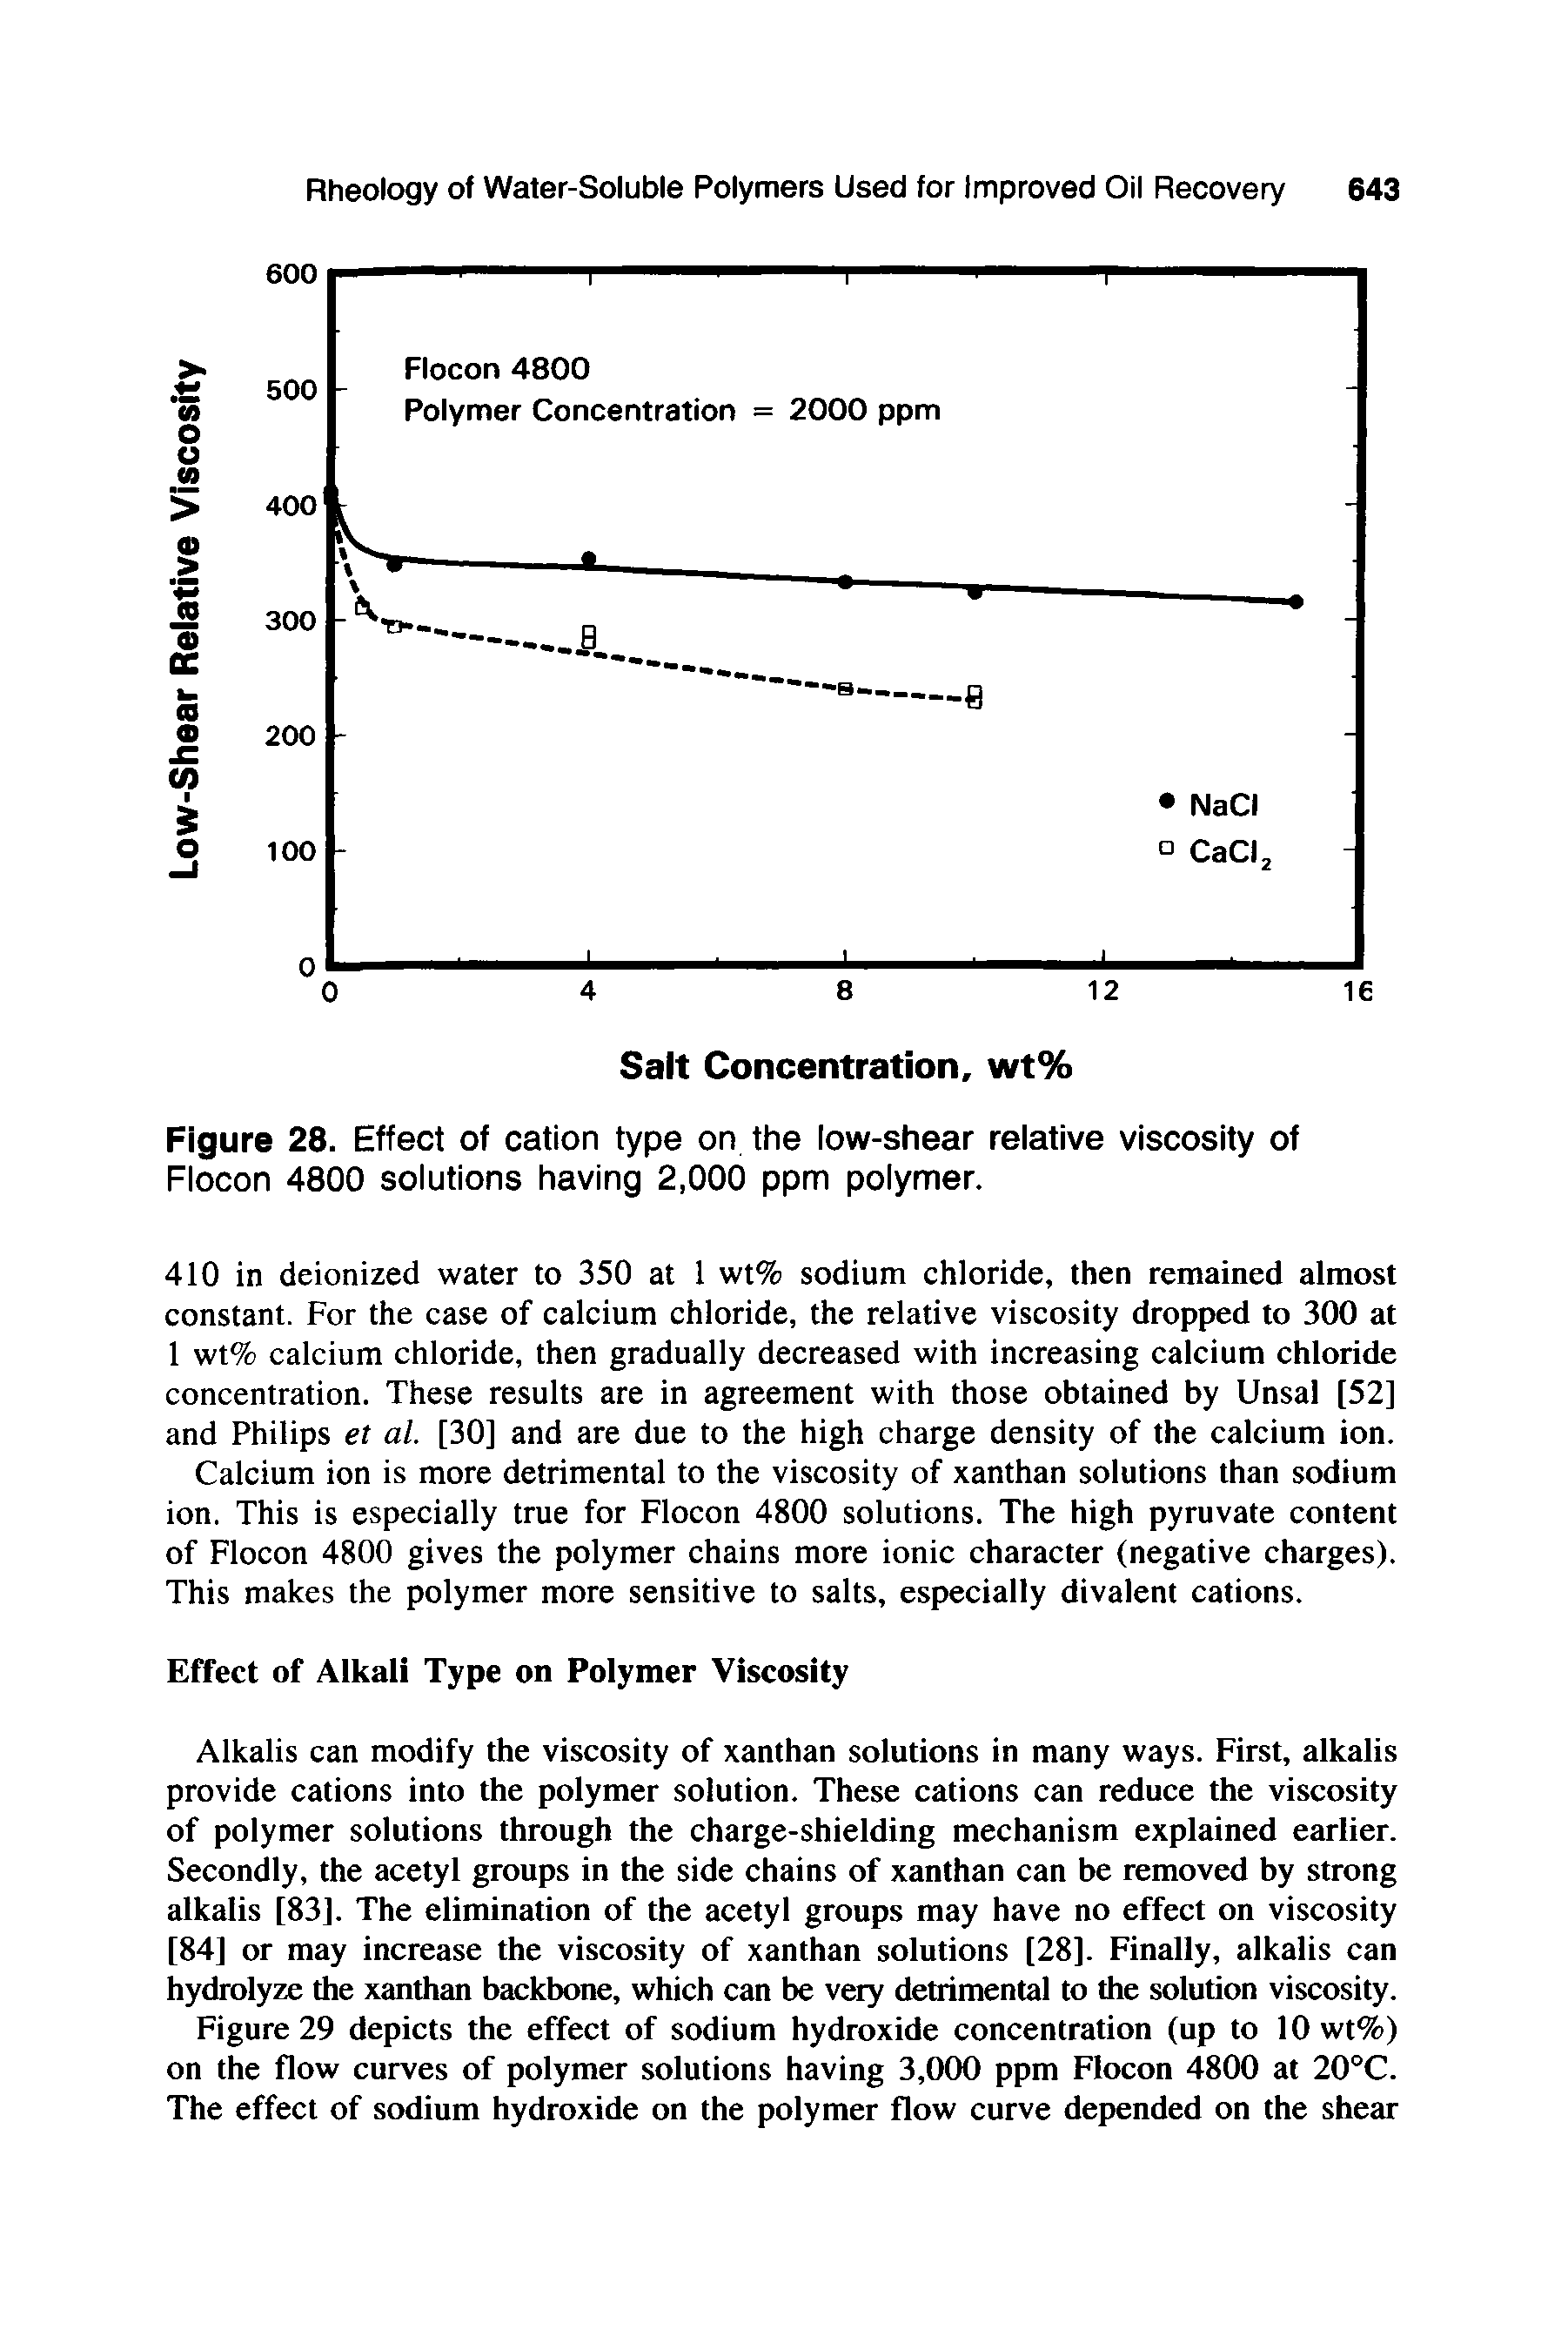 Figure 28. Effect of cation type on the low-shear relative viscosity of Flocon 4800 solutions having 2,000 ppm polymer.